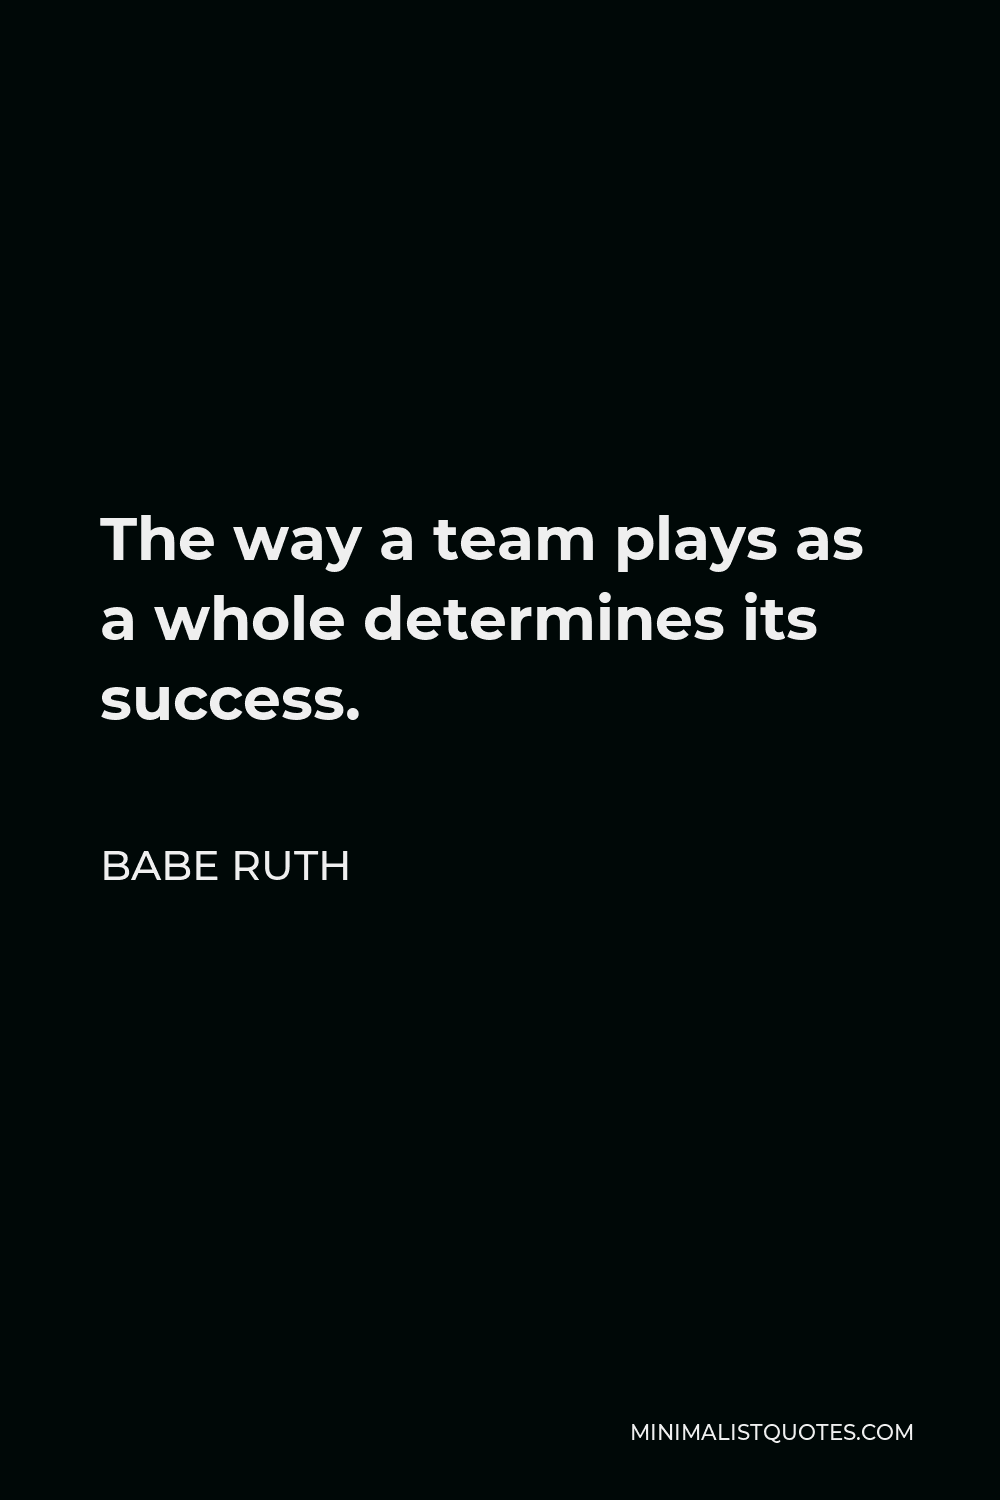 Babe Ruth Quote - The way a team plays as a whole determines its success.